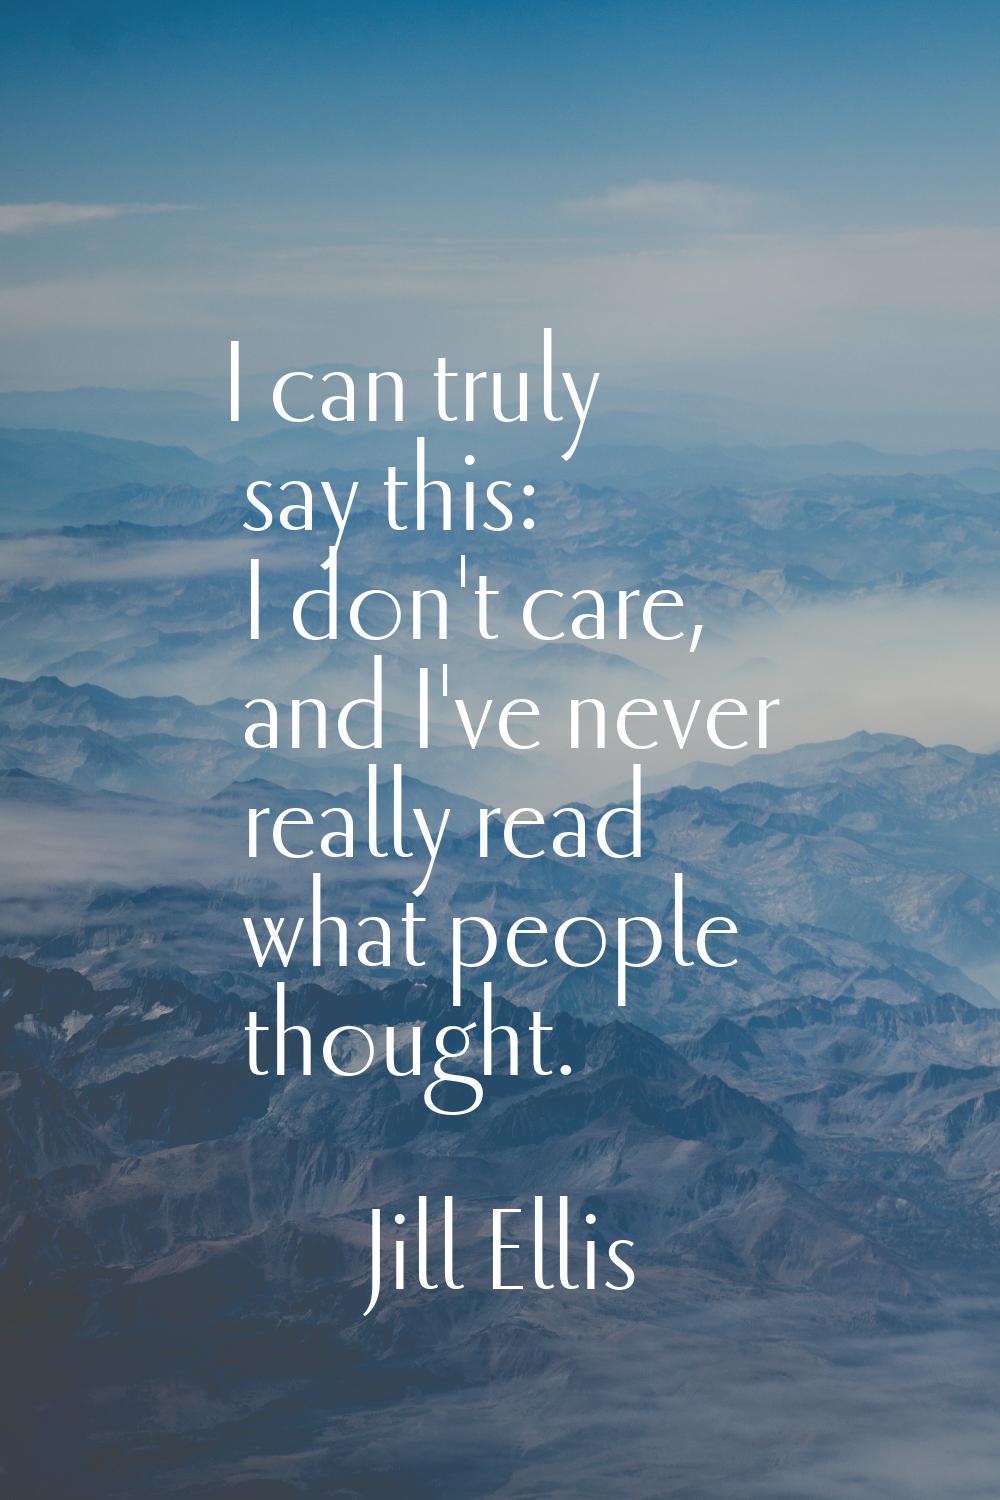 I can truly say this: I don't care, and I've never really read what people thought.